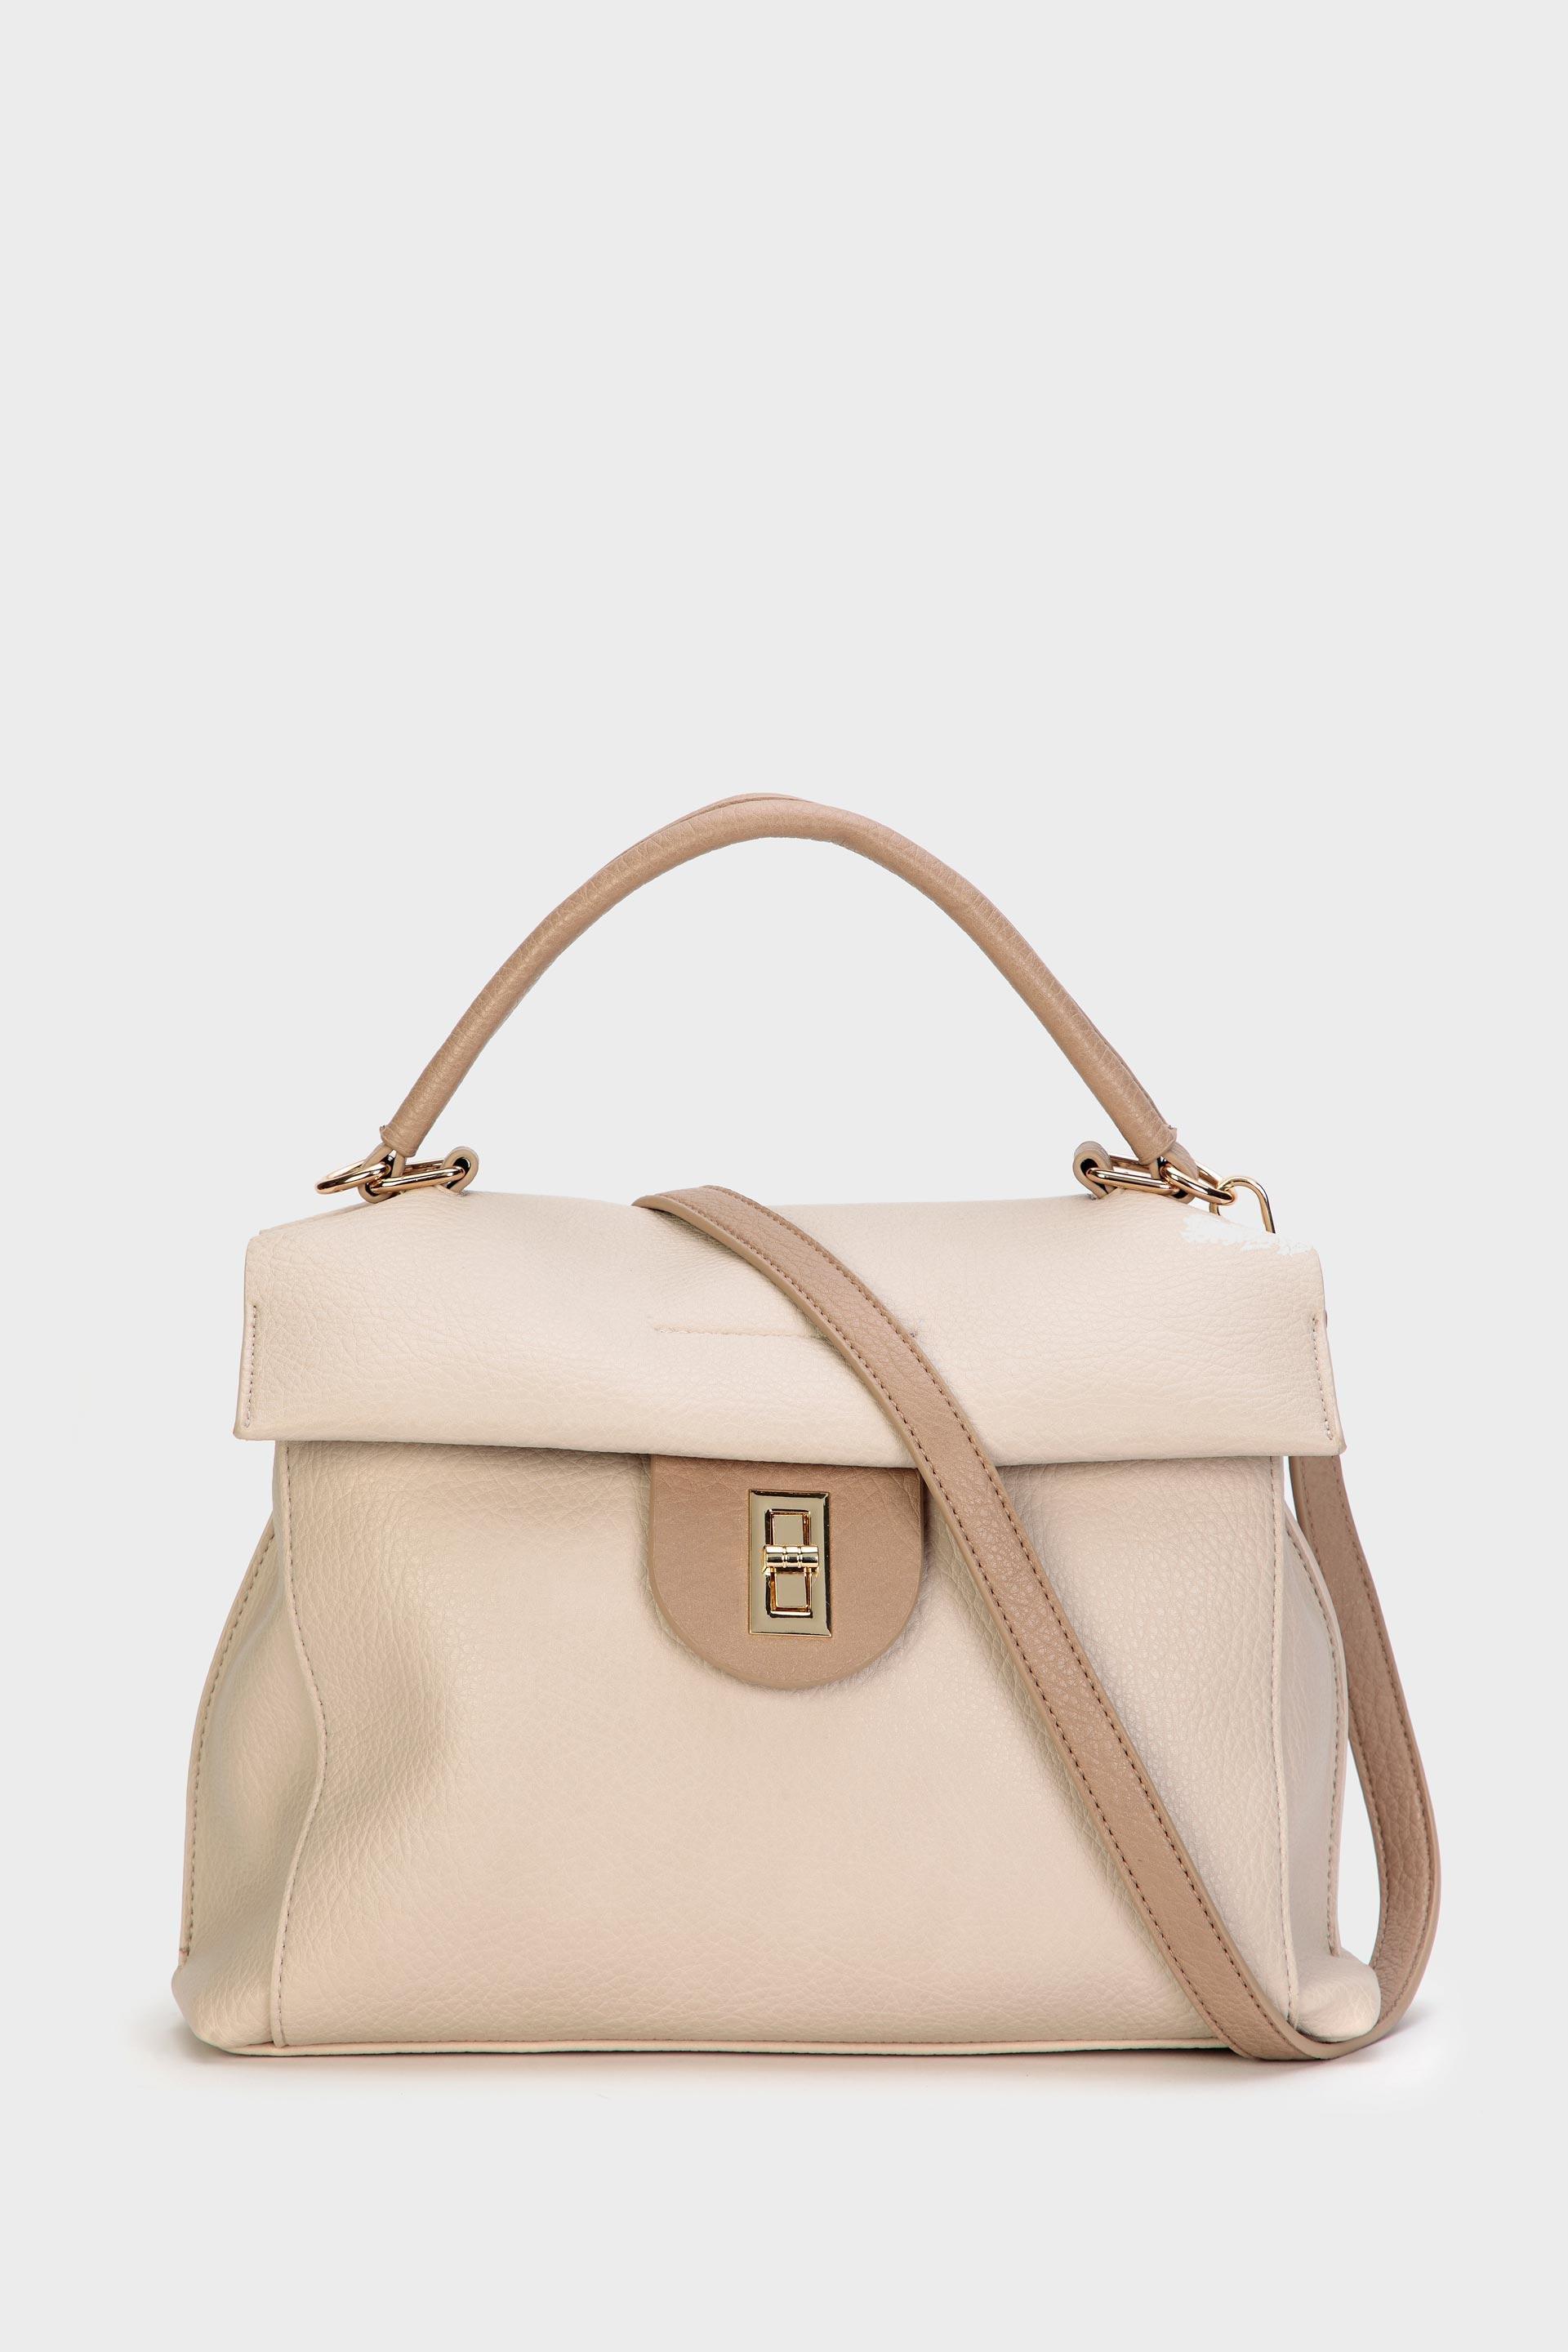 Punt Roma - Beige Two Tone Bag